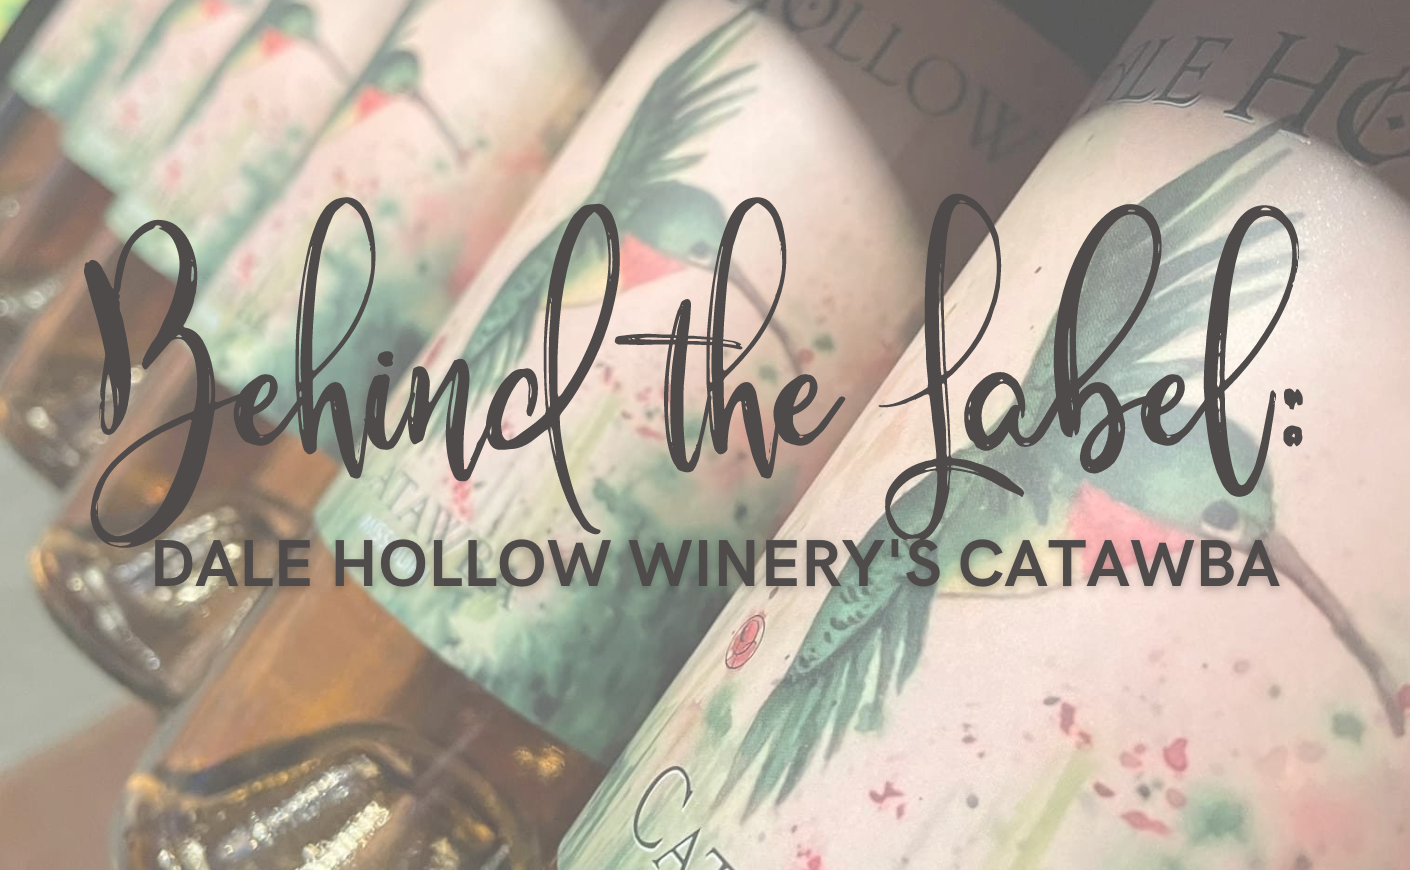 Behind the Label: Dale Hollow Winery's Catawba